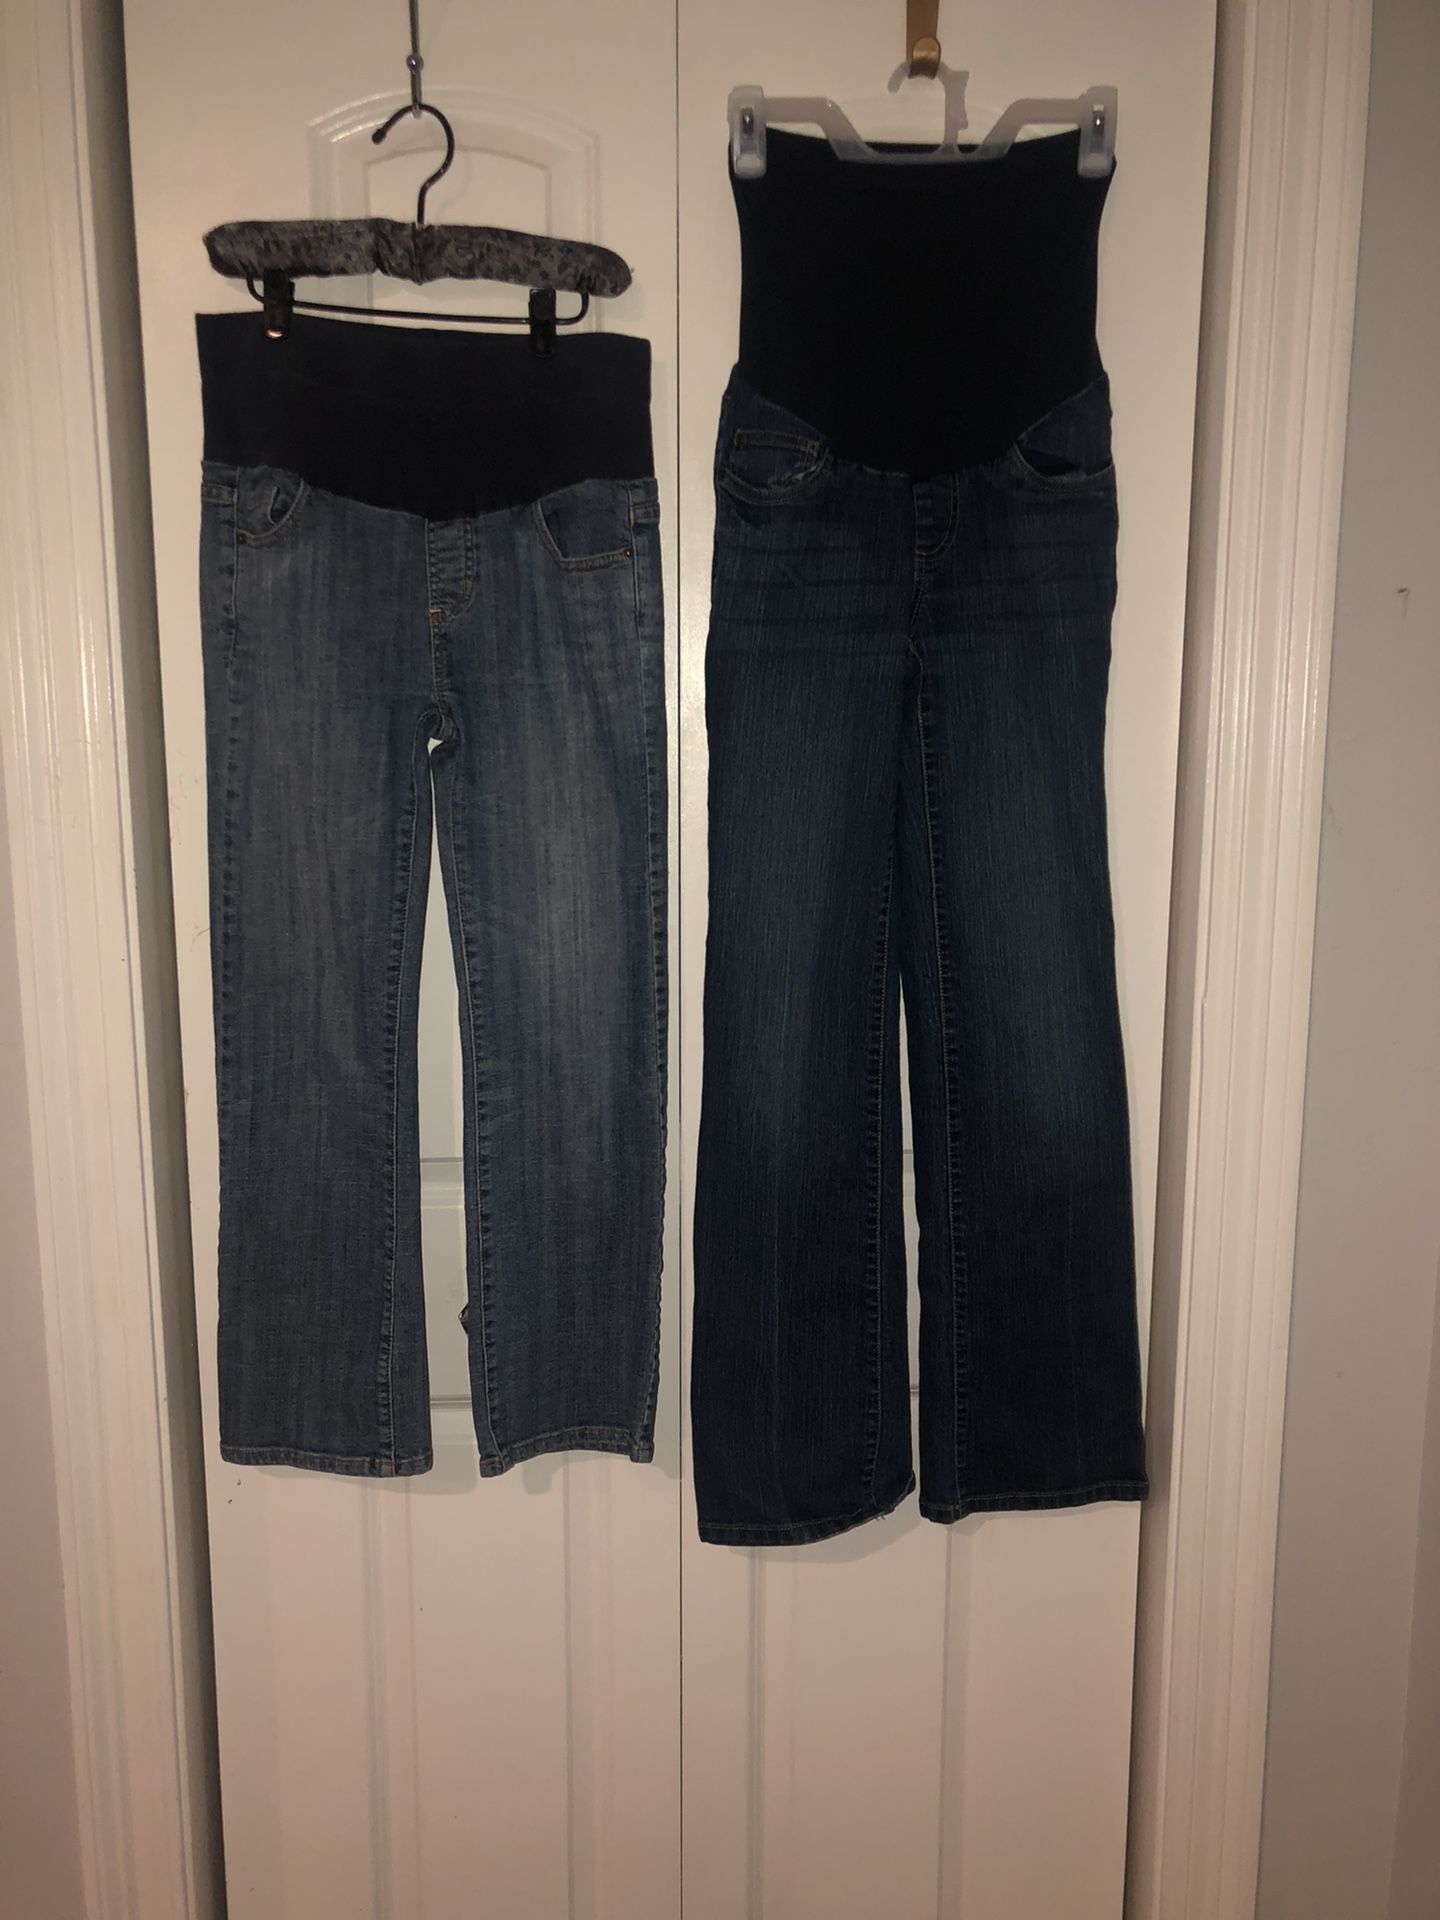 Several pieces of maternity clothes